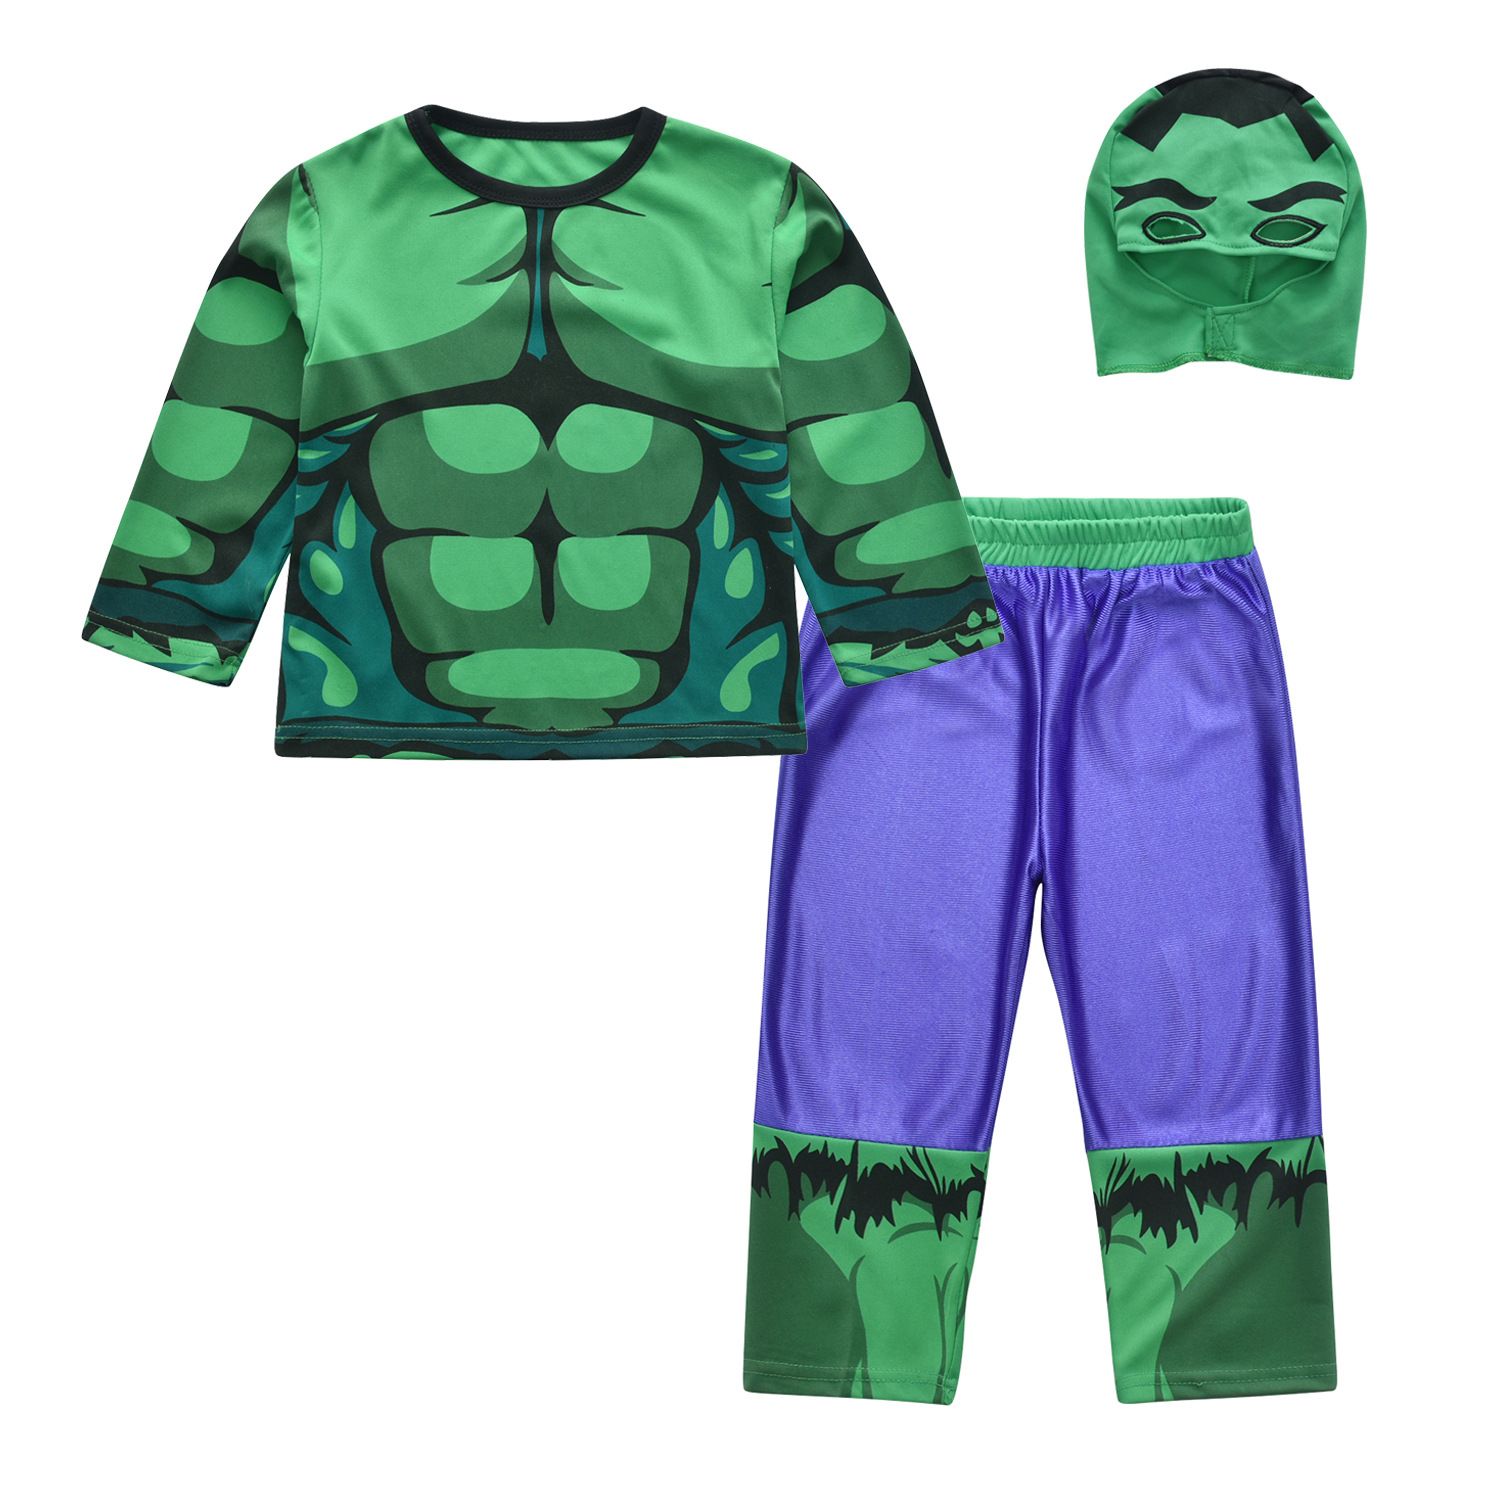 Hulk Muscle Kids Cotton Costume With Mask, 5 - 7 Years